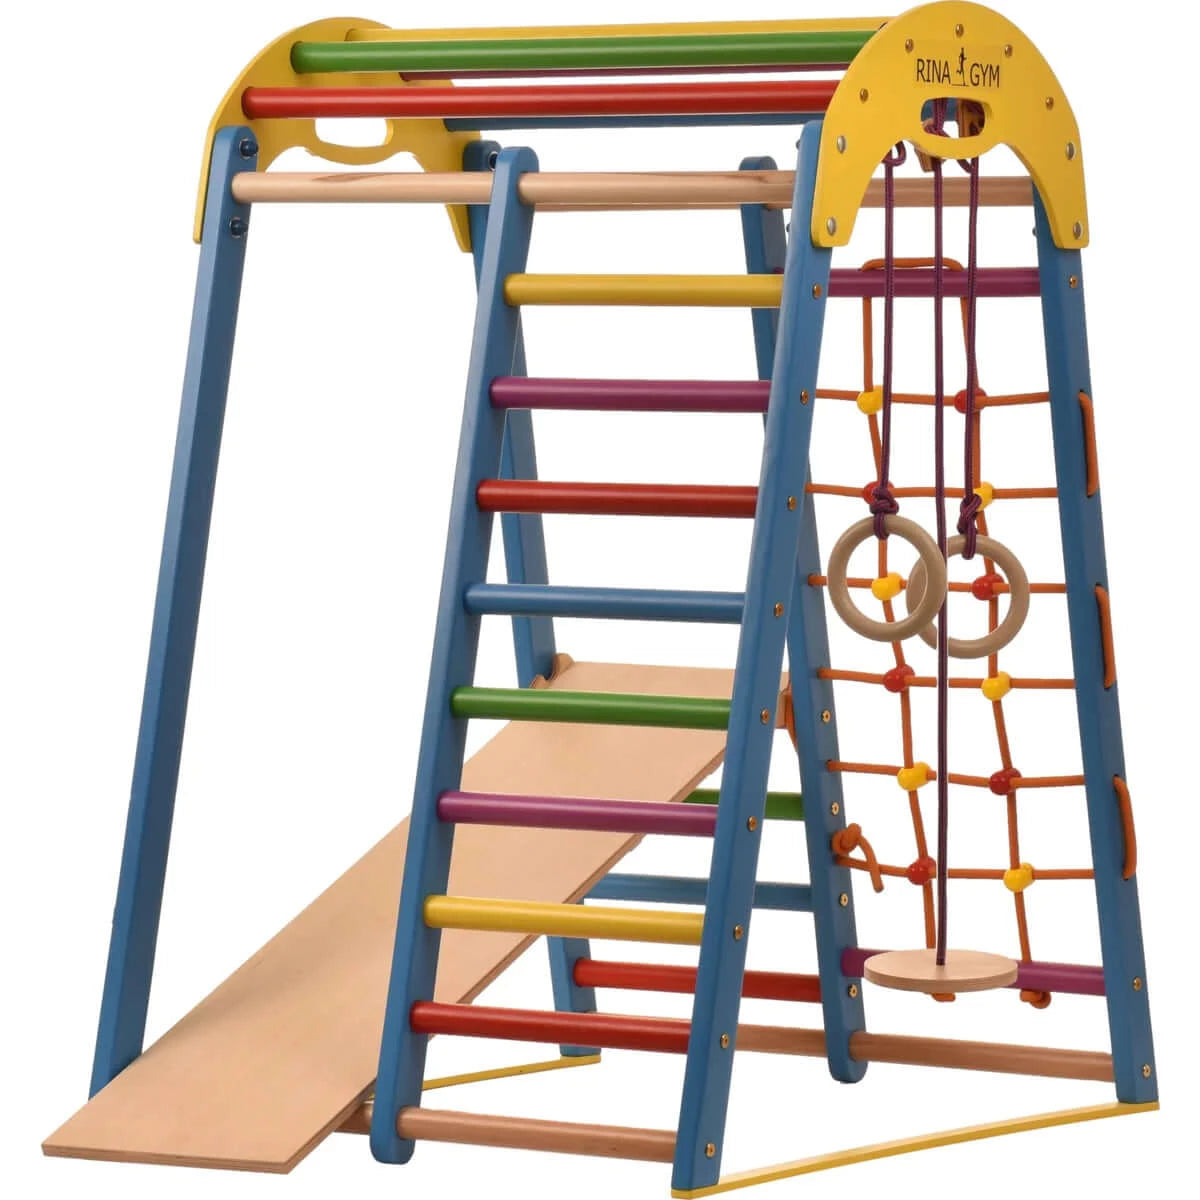 Indoor blue playground made of wood with climbing net, swedish ladder, rings, slide